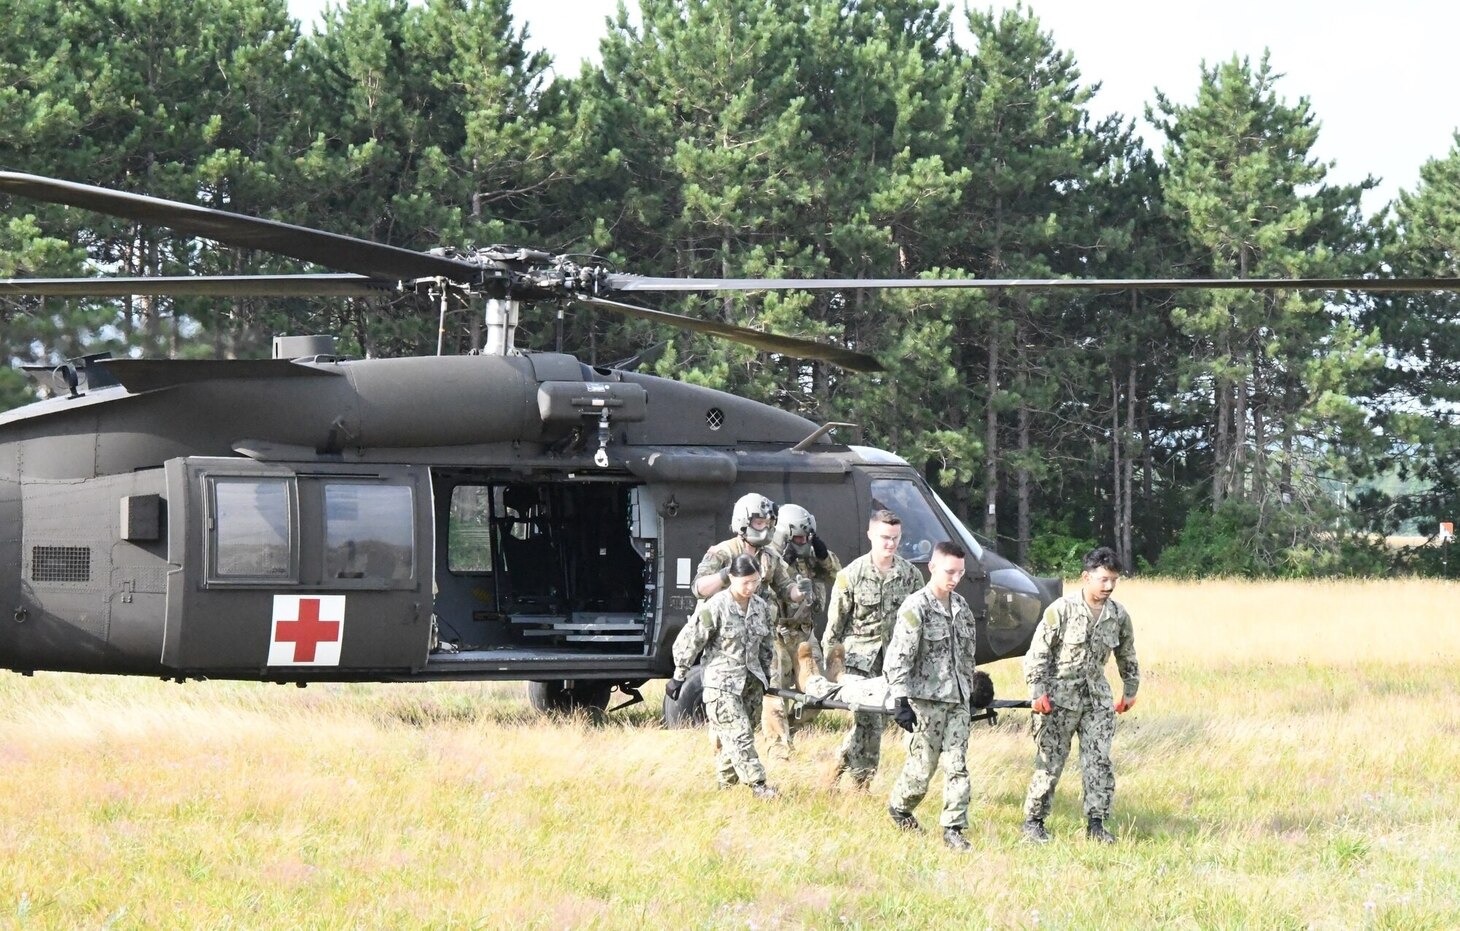 Roughly 60 Navy hospital corpsmen participated in Operation Commanding Force, the annual two-week training exercise, at Fort Drum. The culminating event on July 21 included practicing tactical field care and medical evacuation procedures with reservists going through a litter obstacle course. The training was supported by cadre from the Bridgewater-Vaccaro Medical Simulation Training Center (MSTC), the 10th Combat Aviation Brigade’s 3rd General Support Aviation Battalion (DUSTOFF) and medics from 1st Brigade Combat Team and 2nd Brigade Combat Team. (Photo by Mike Strasser, Fort Drum Garrison Public Affairs) (Photo Credit: Michael Strasser)